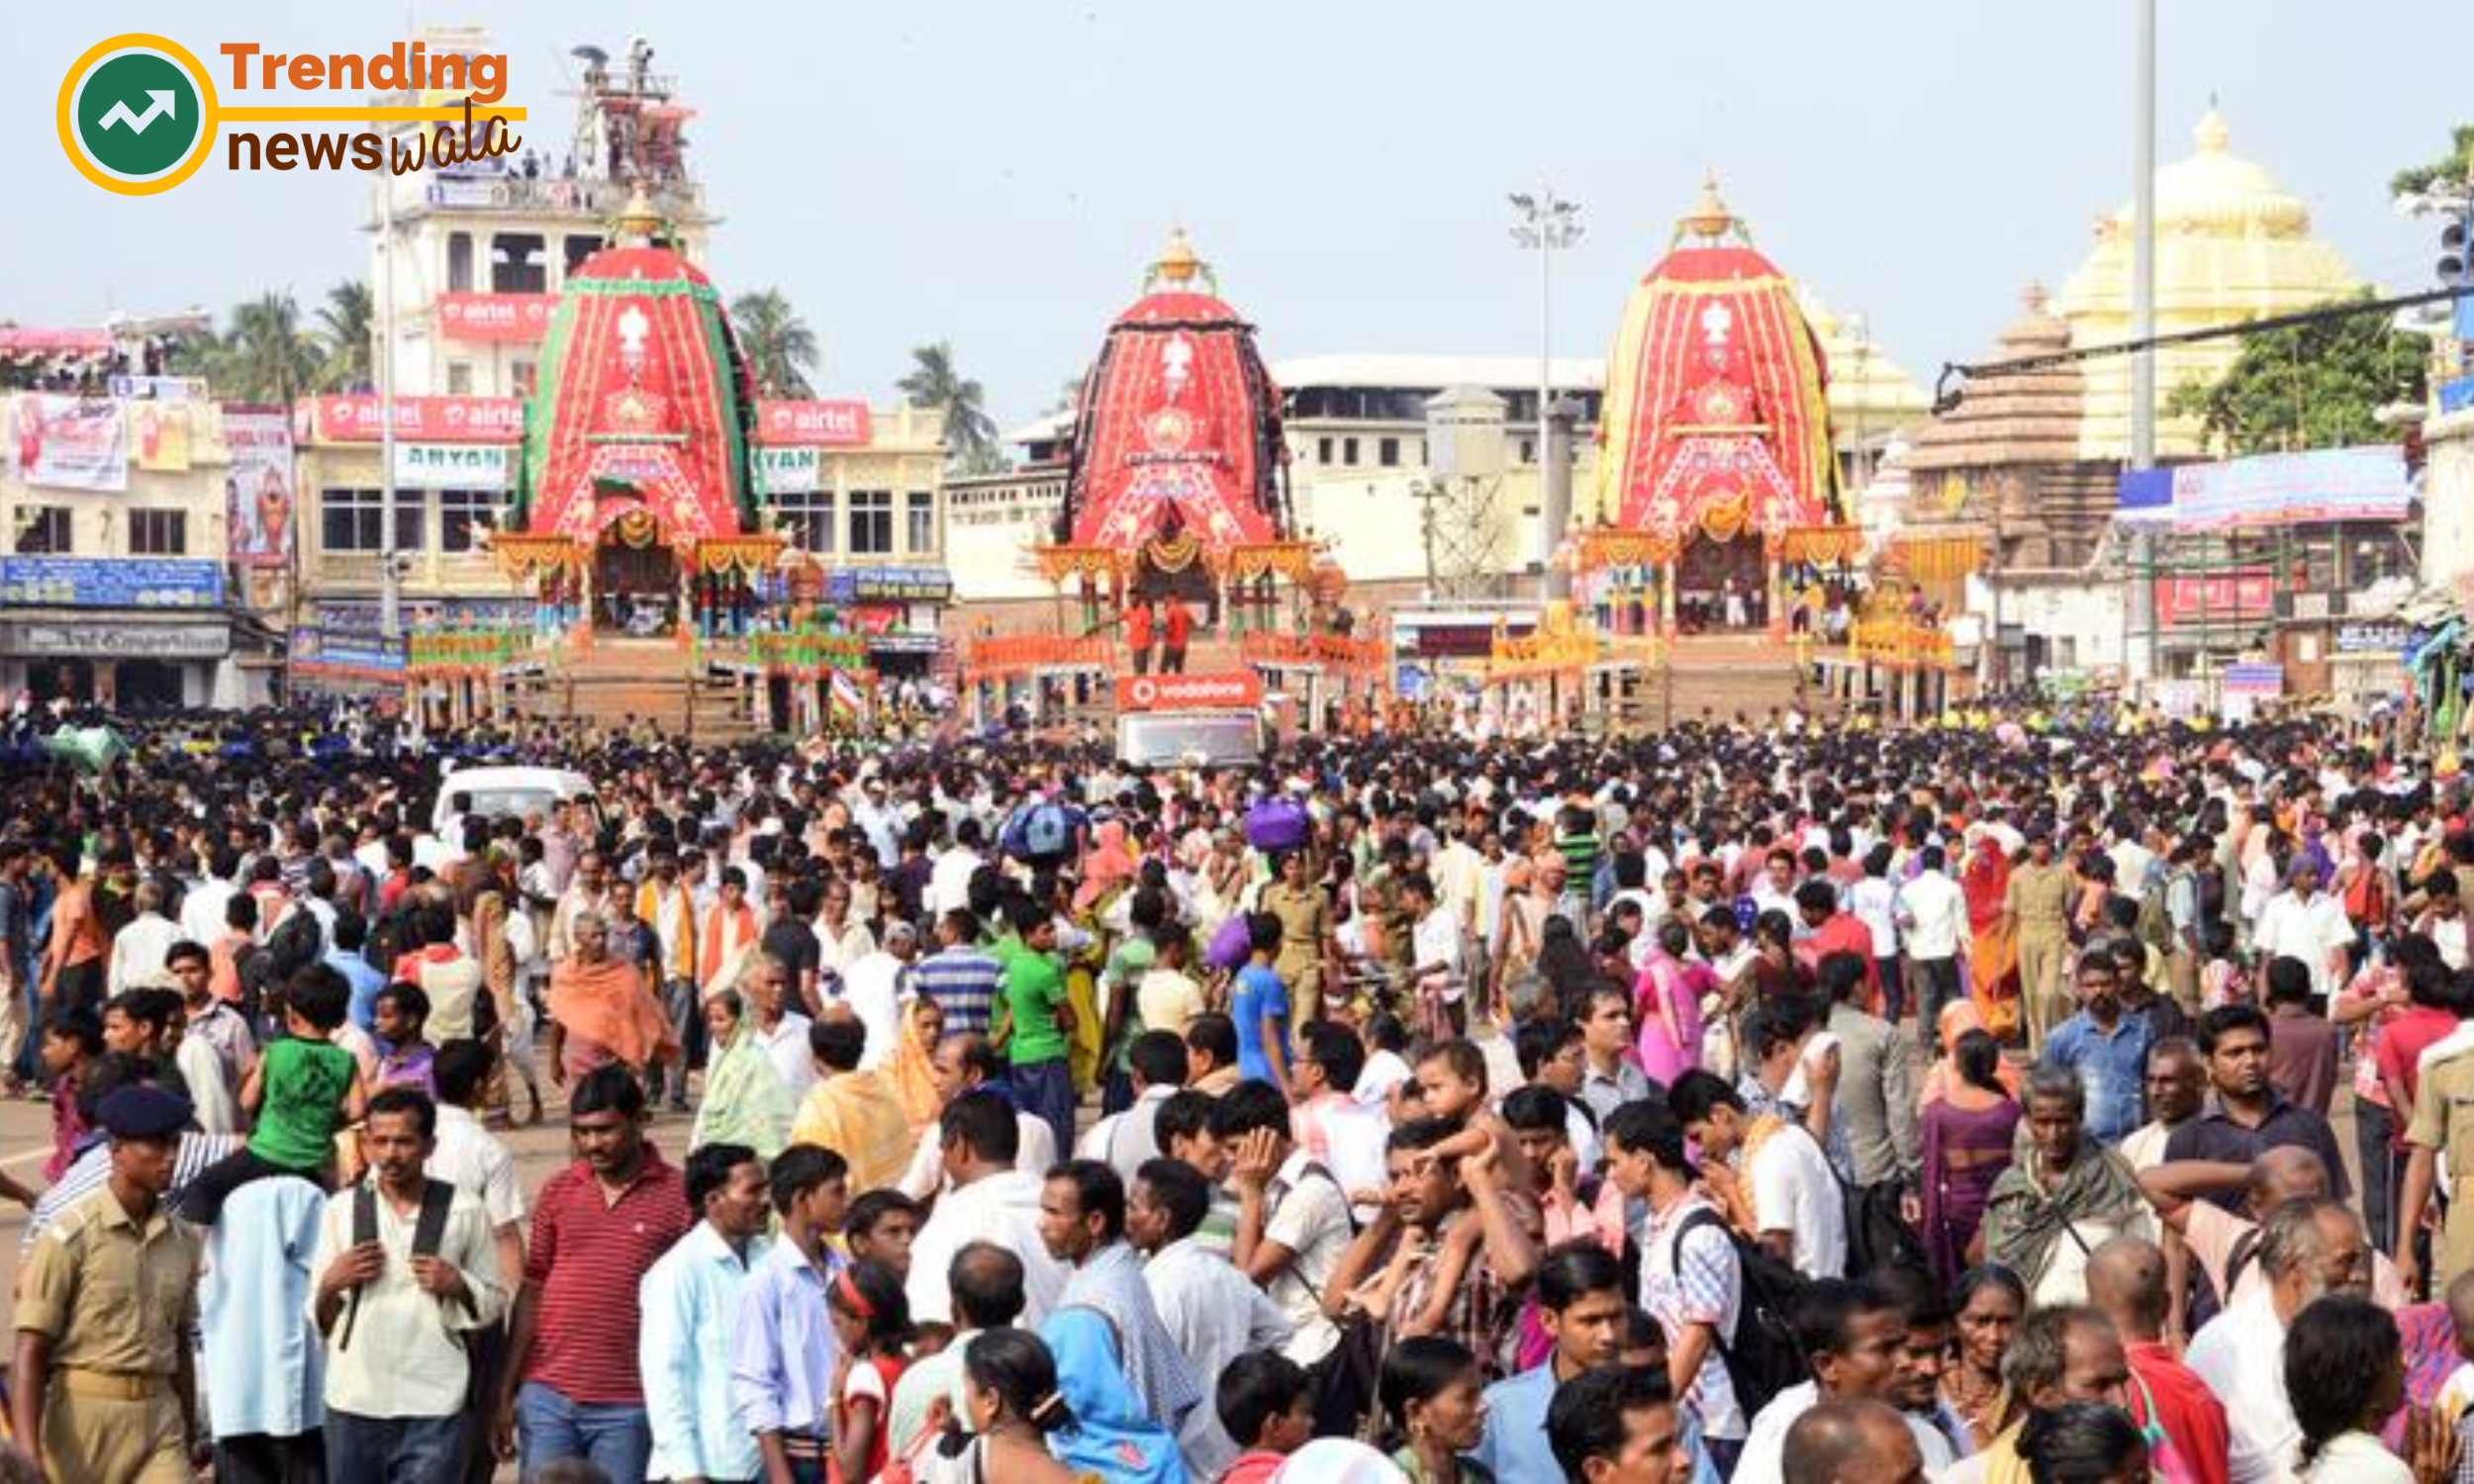 Participation guidelines for Ratha Yatra devotees are expected to maintain a respectful attitude towards the sacred space of the temple